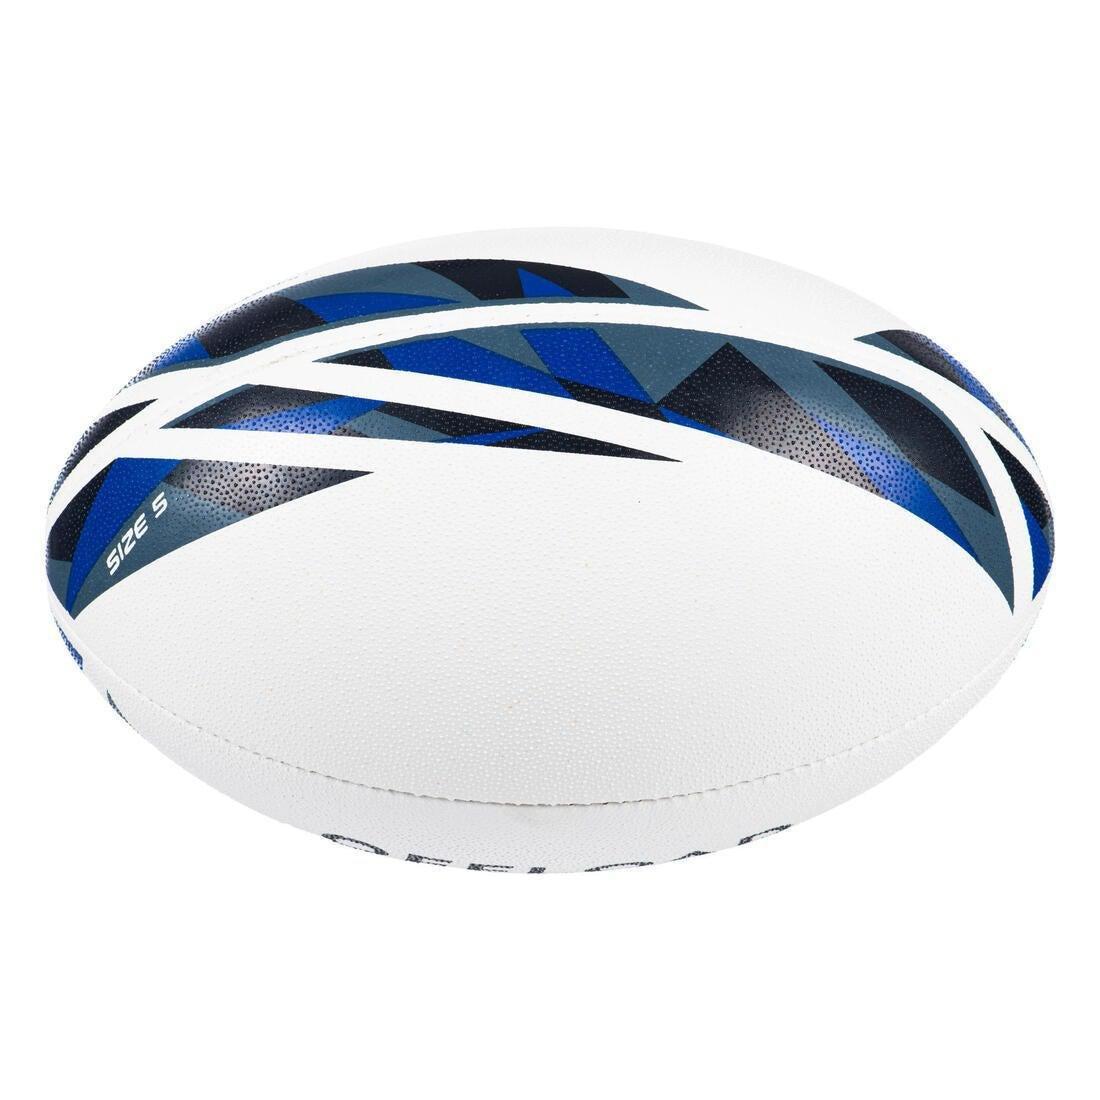 OFFLOAD - Rugby Ball - R500, White